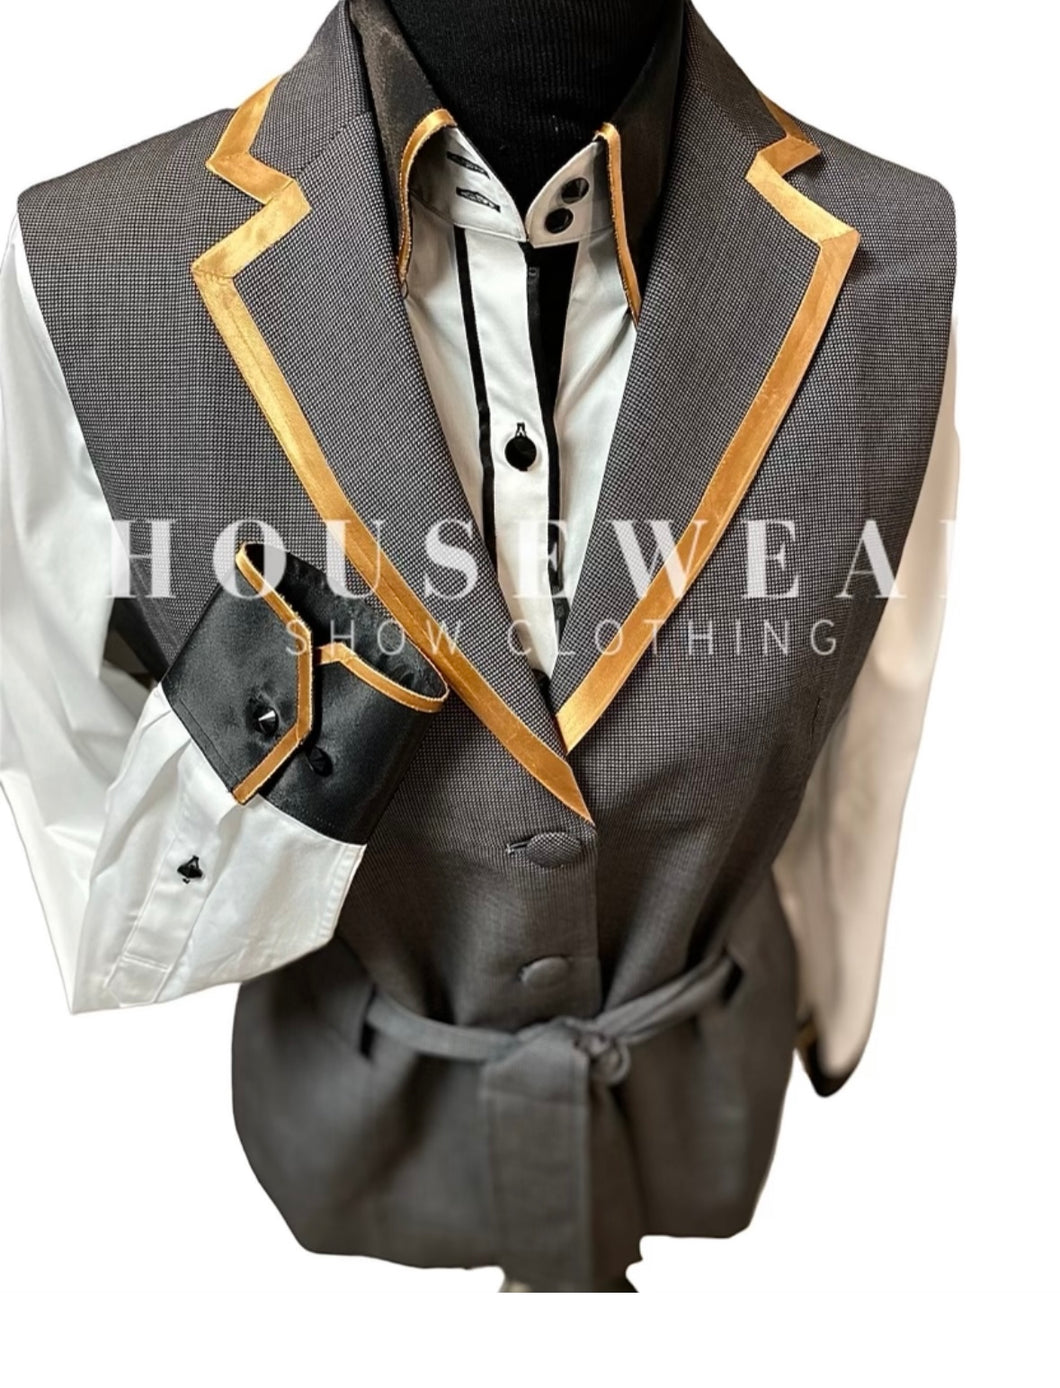 HouseWear Tailored Collection Black & Gold Print Vest - Size 14